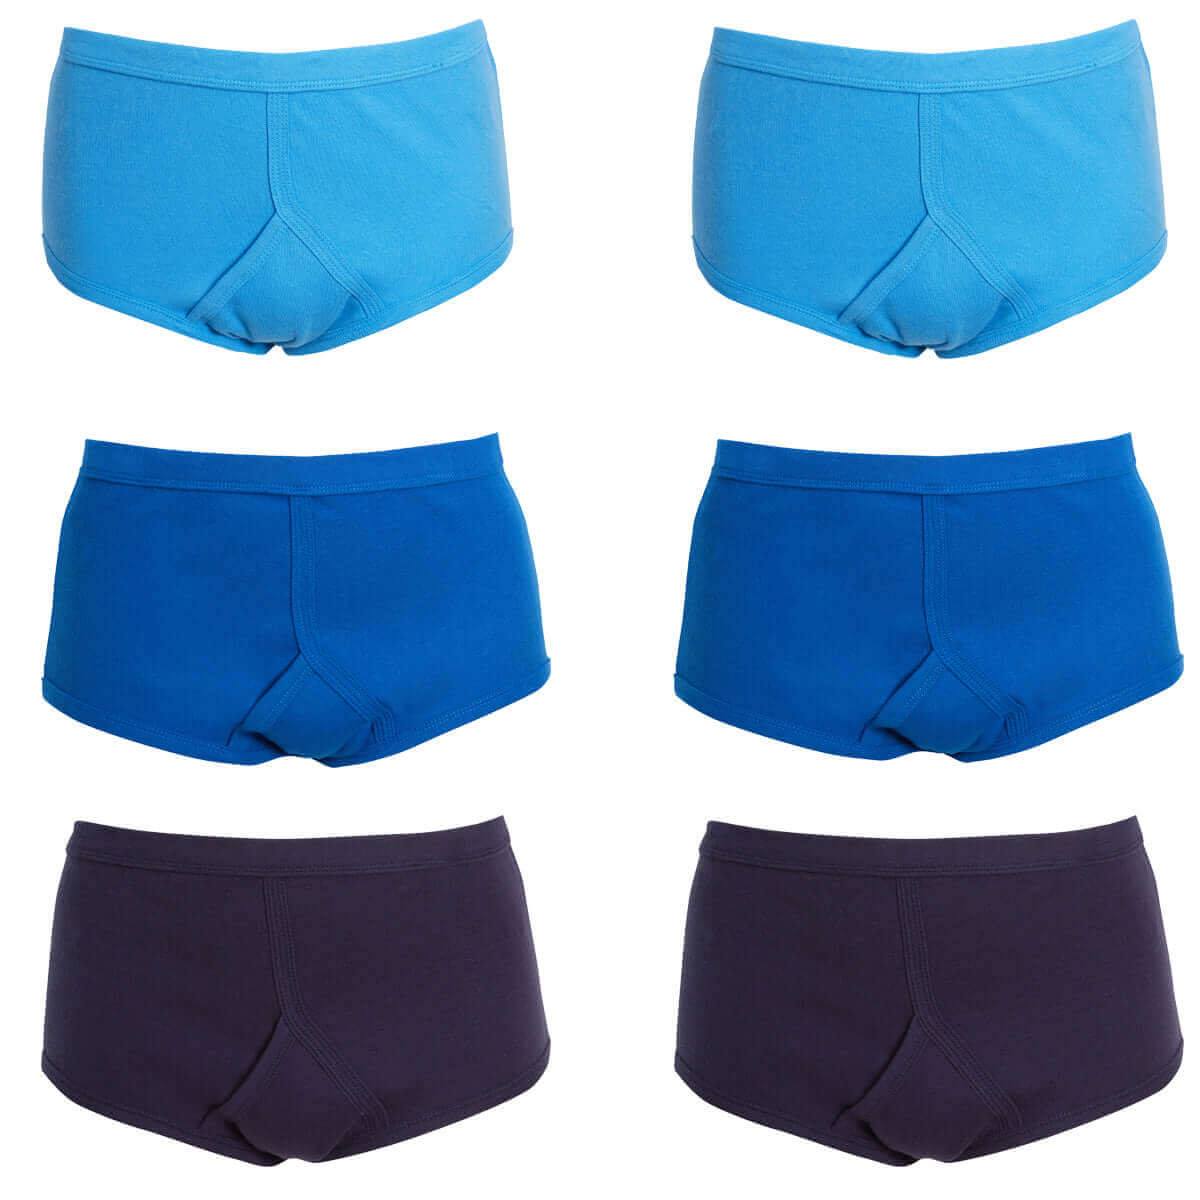 Pack Of 6 Men's Organic Cotton Y Fronts Underpants Sports Underwear. Buy now for £13.00. A Underwear by Sock Stack. assorted, blue, bottom, boys, briefs, christmas, clothing, comfortable, cotton, man, mens, navy, pants, shorts, small, sports, trunks, Unde